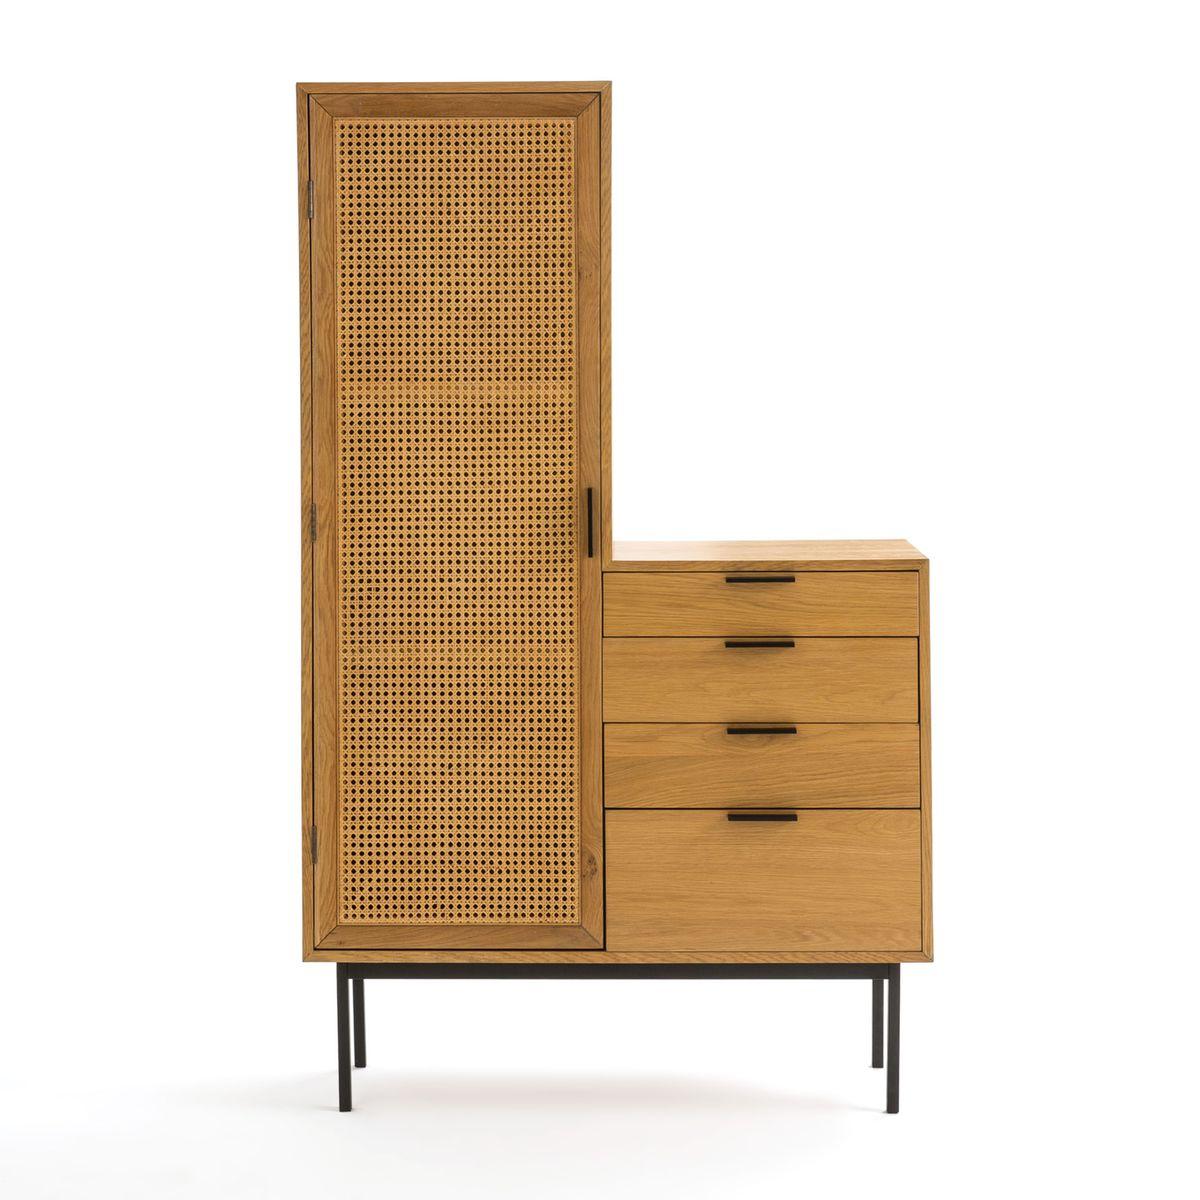 Oak wooden and braided rattan midcentury style and asymmetrical design chest of drawers composed of an oak wooden asymmetrical structure, subtle work of the graphic door adorned with woven cane rattan on the left dressing space, a chest of drawers